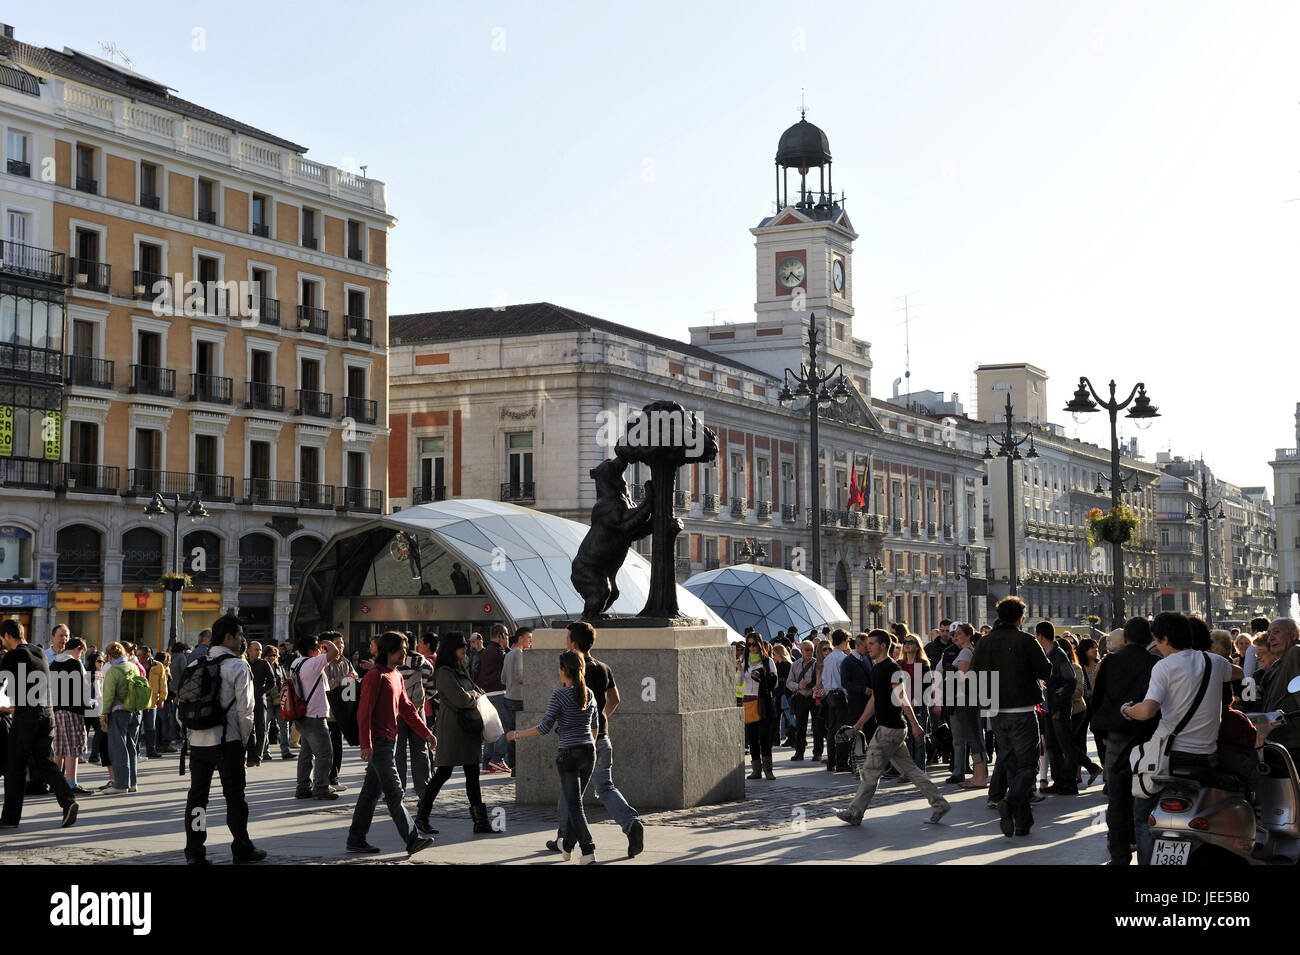 Spain, Madrid, Old Town, Puerta del sol, bear's sculpture, many people, Stock Photo